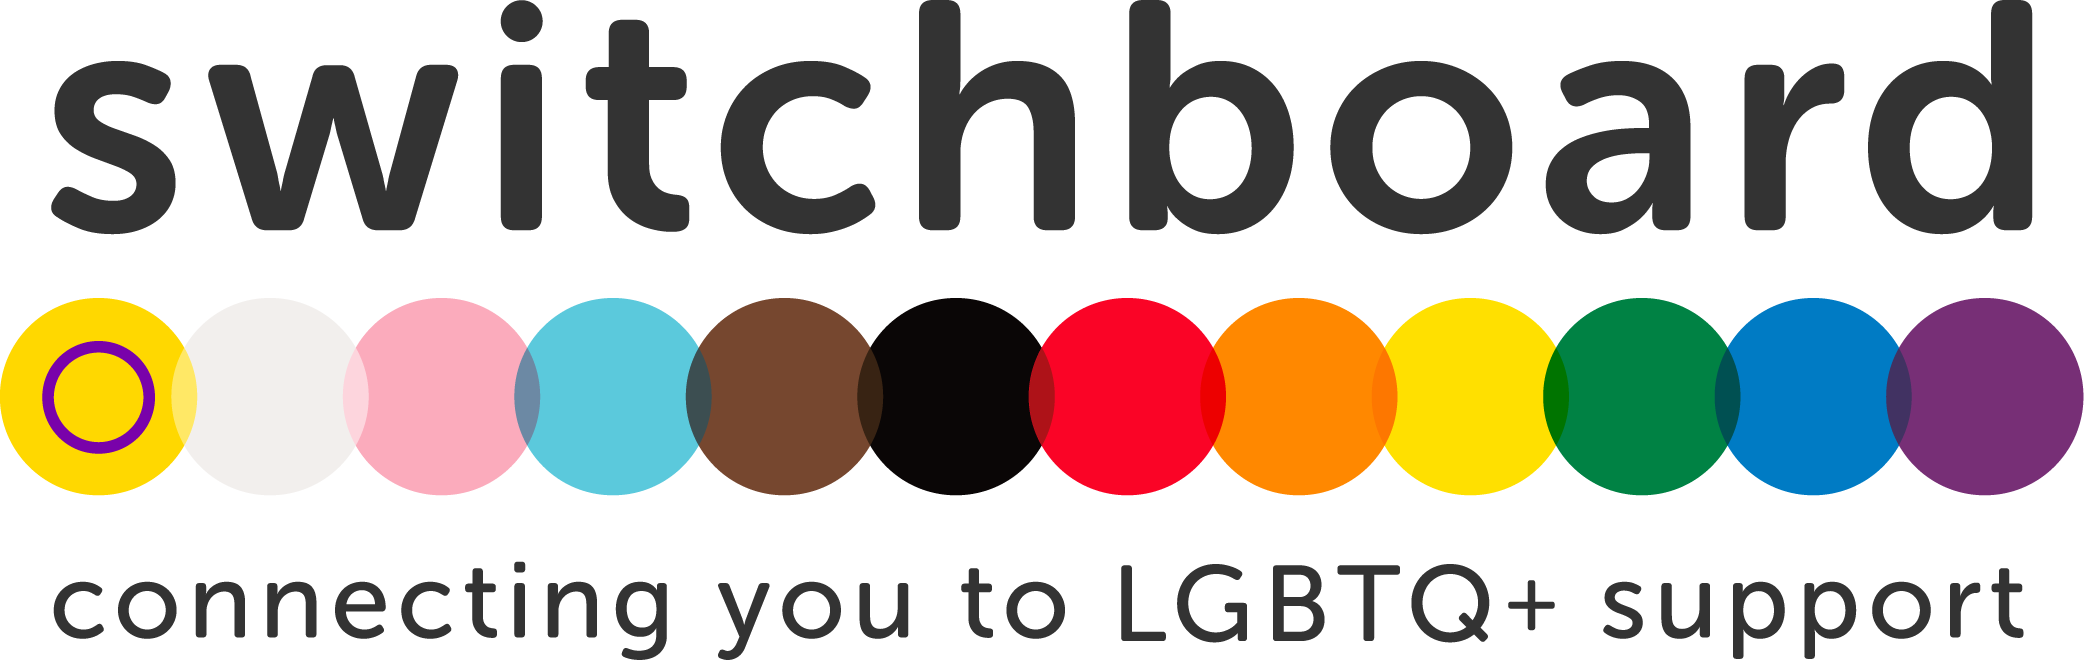 Brighton & Hove LGBT Switchboard